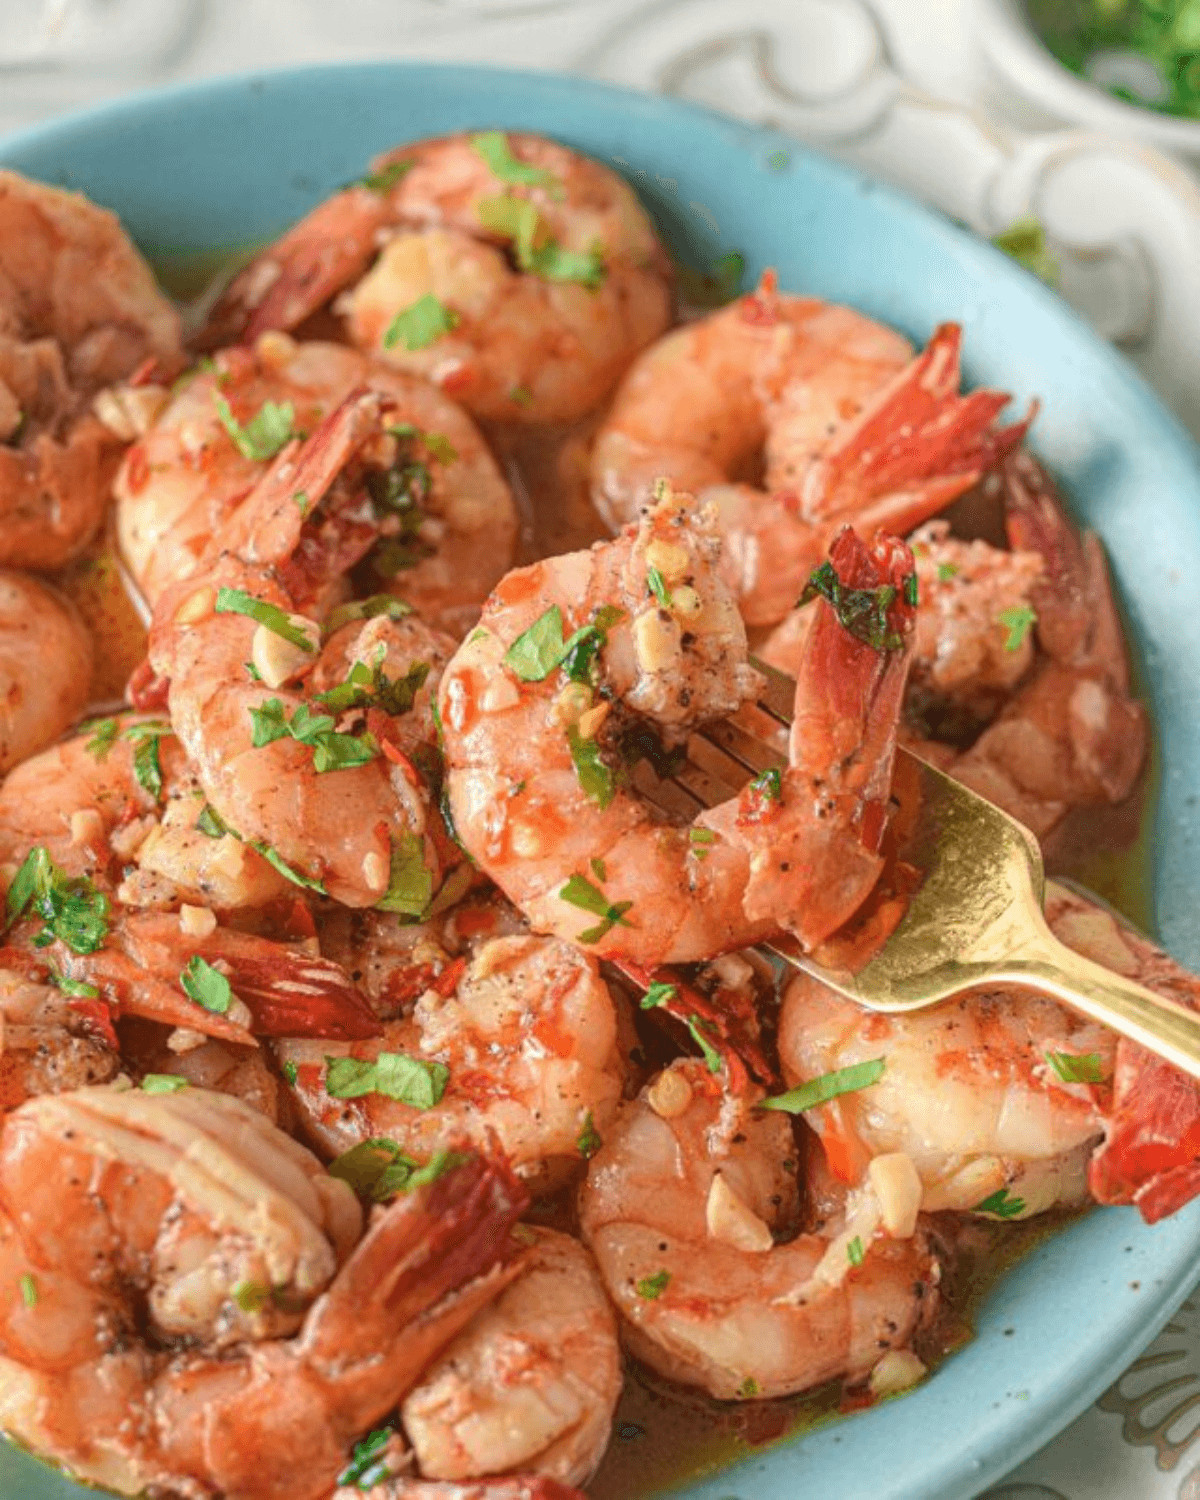 A bowl of Shrimp Scampi without Wine, seasoned and garnished with herbs.